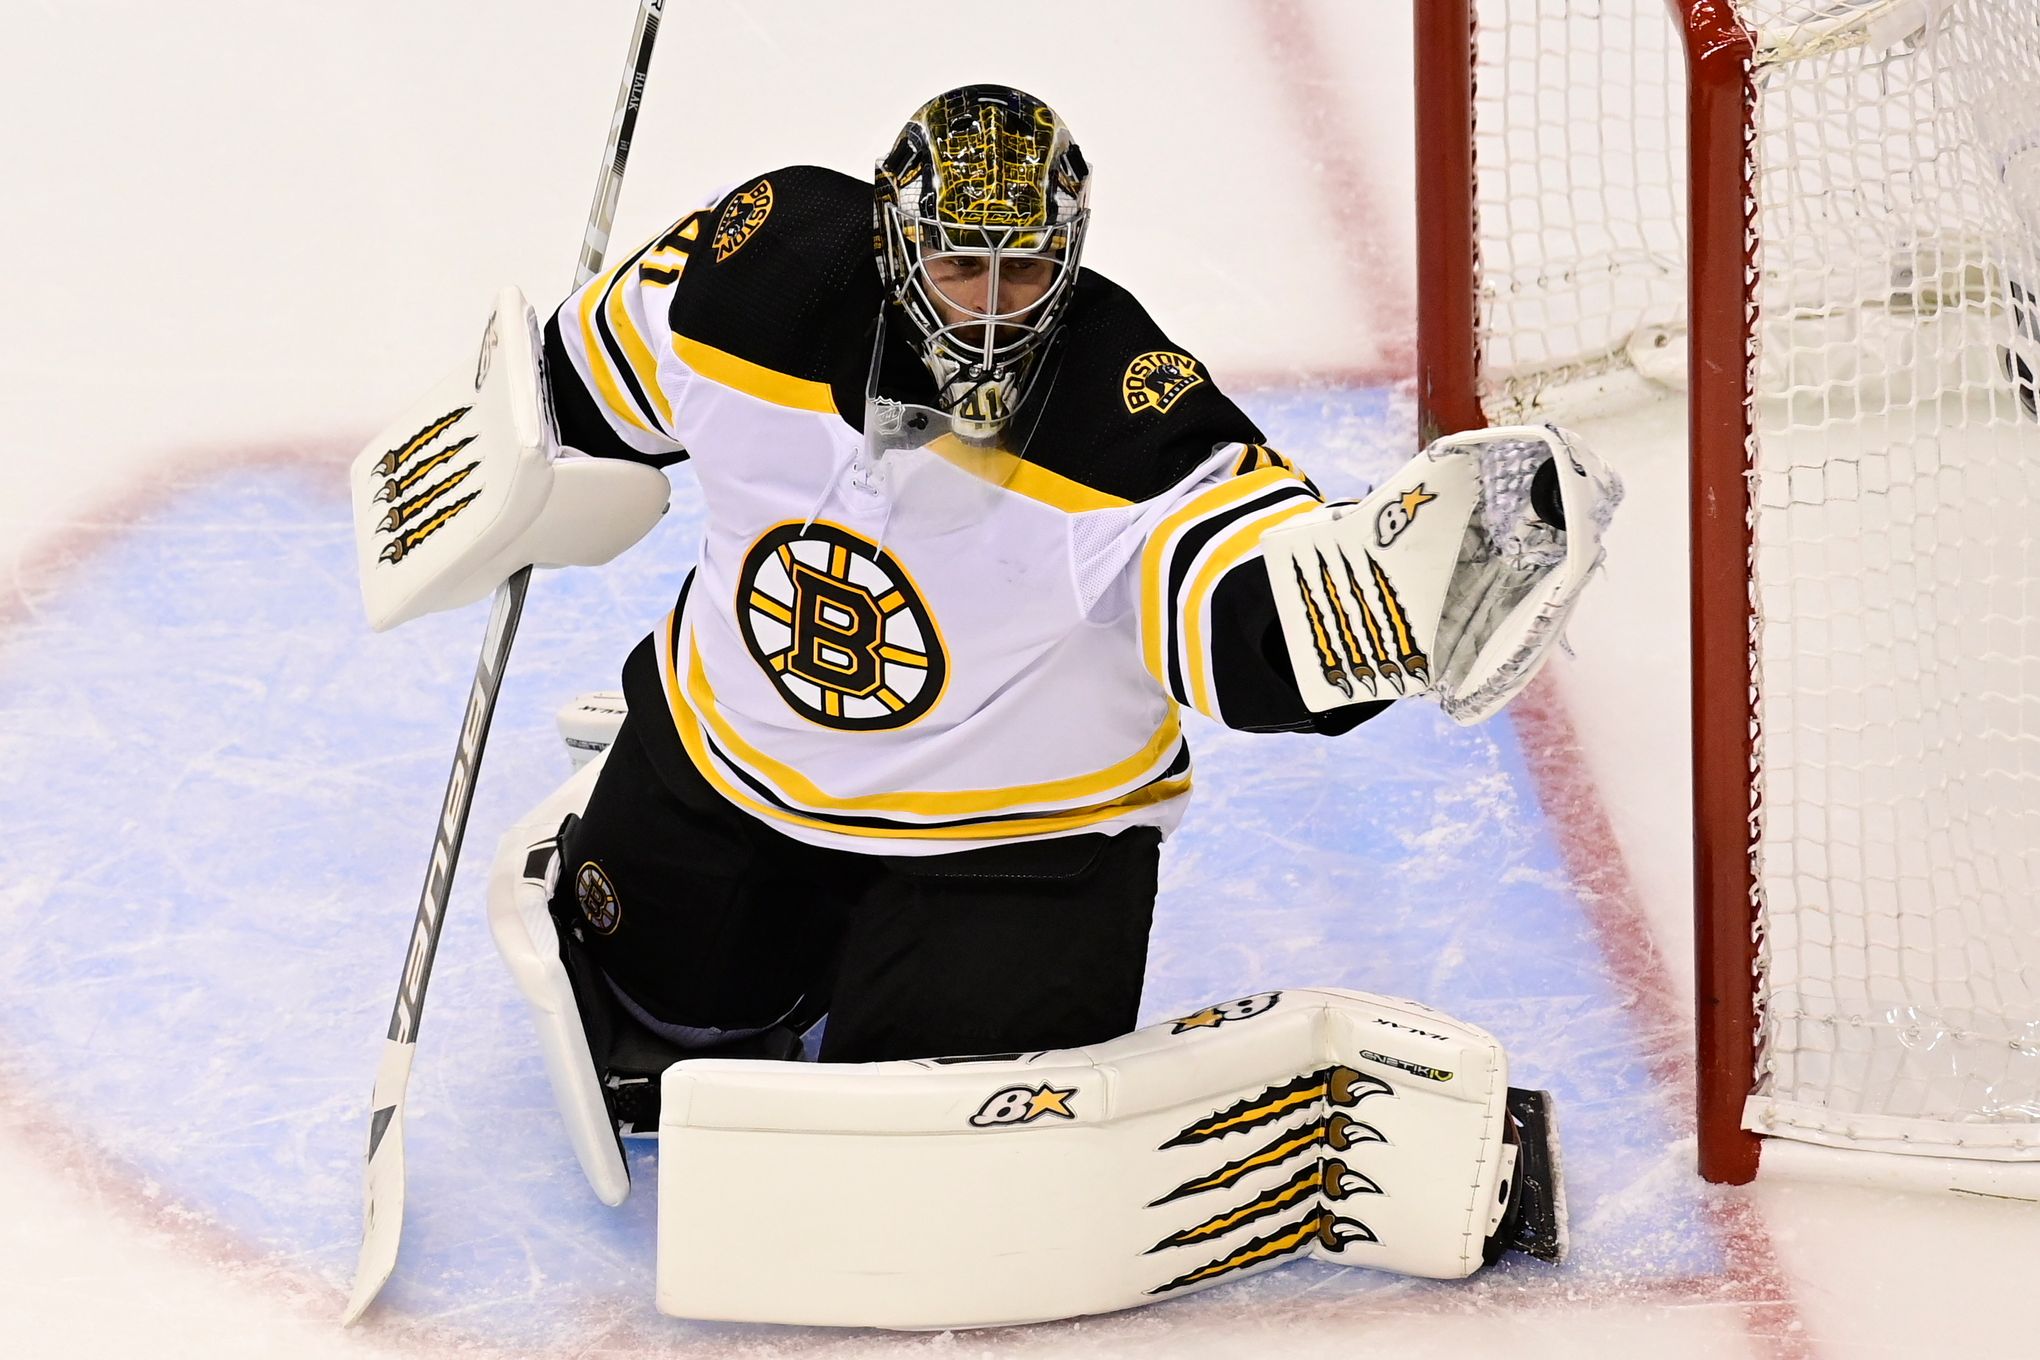 The Bruins are playing well, but it's Jaroslav Halak who will